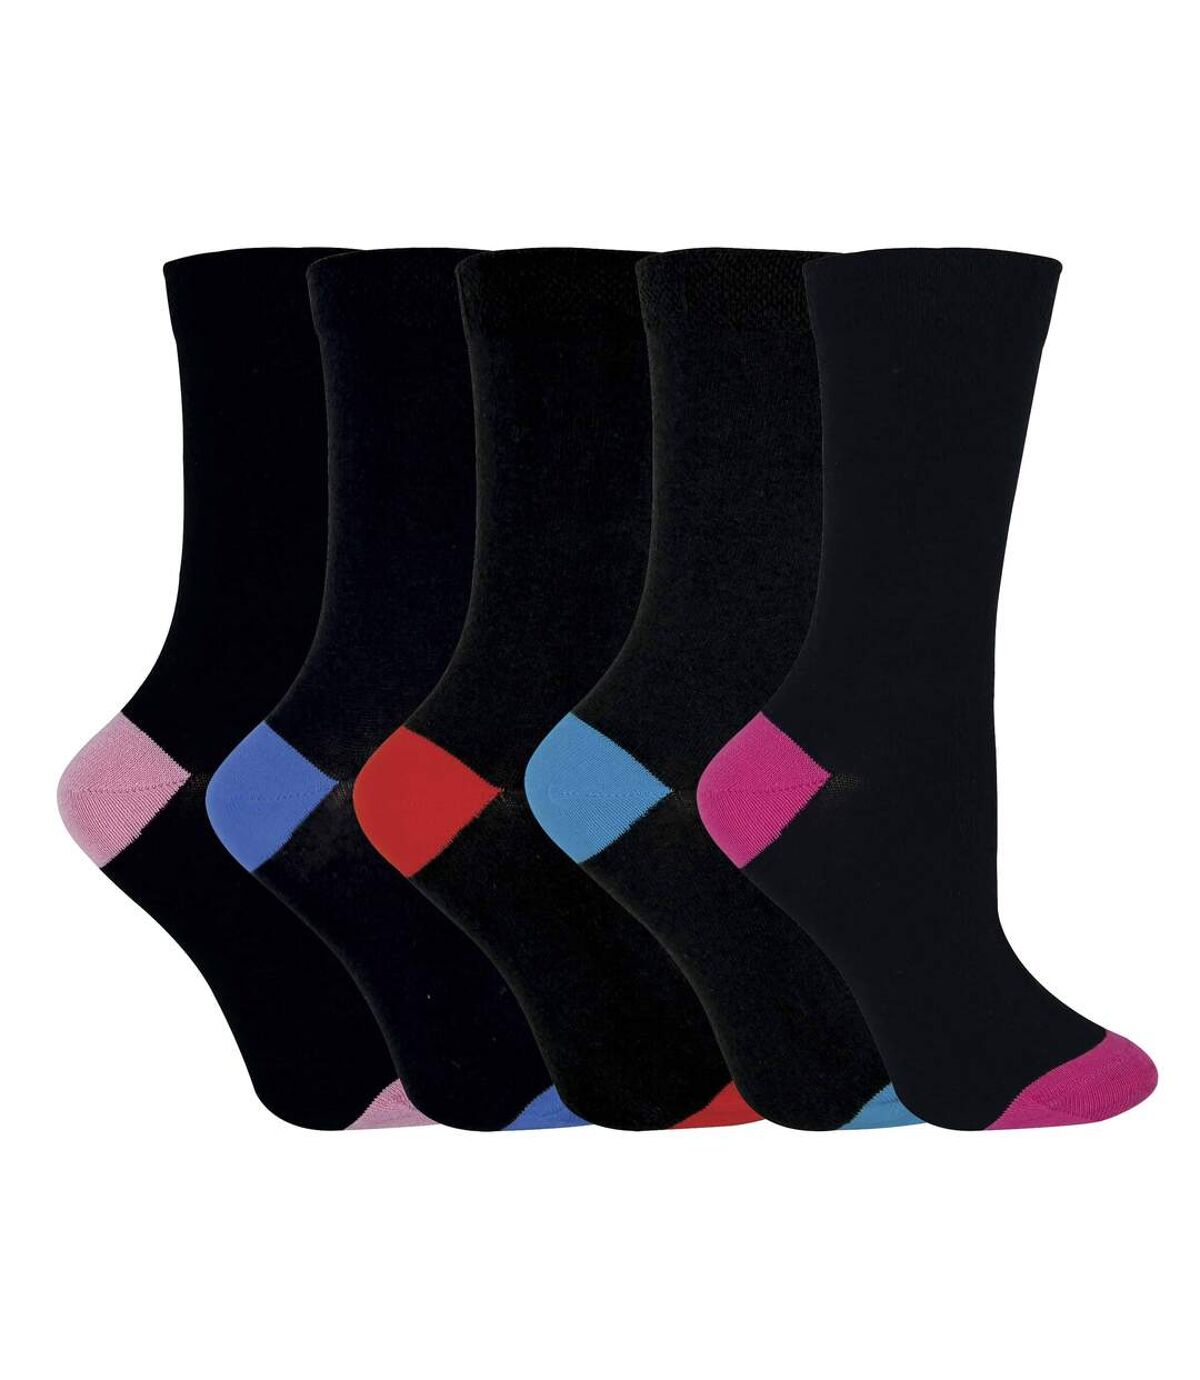 Womens soft top cotton rich socks in a multipack